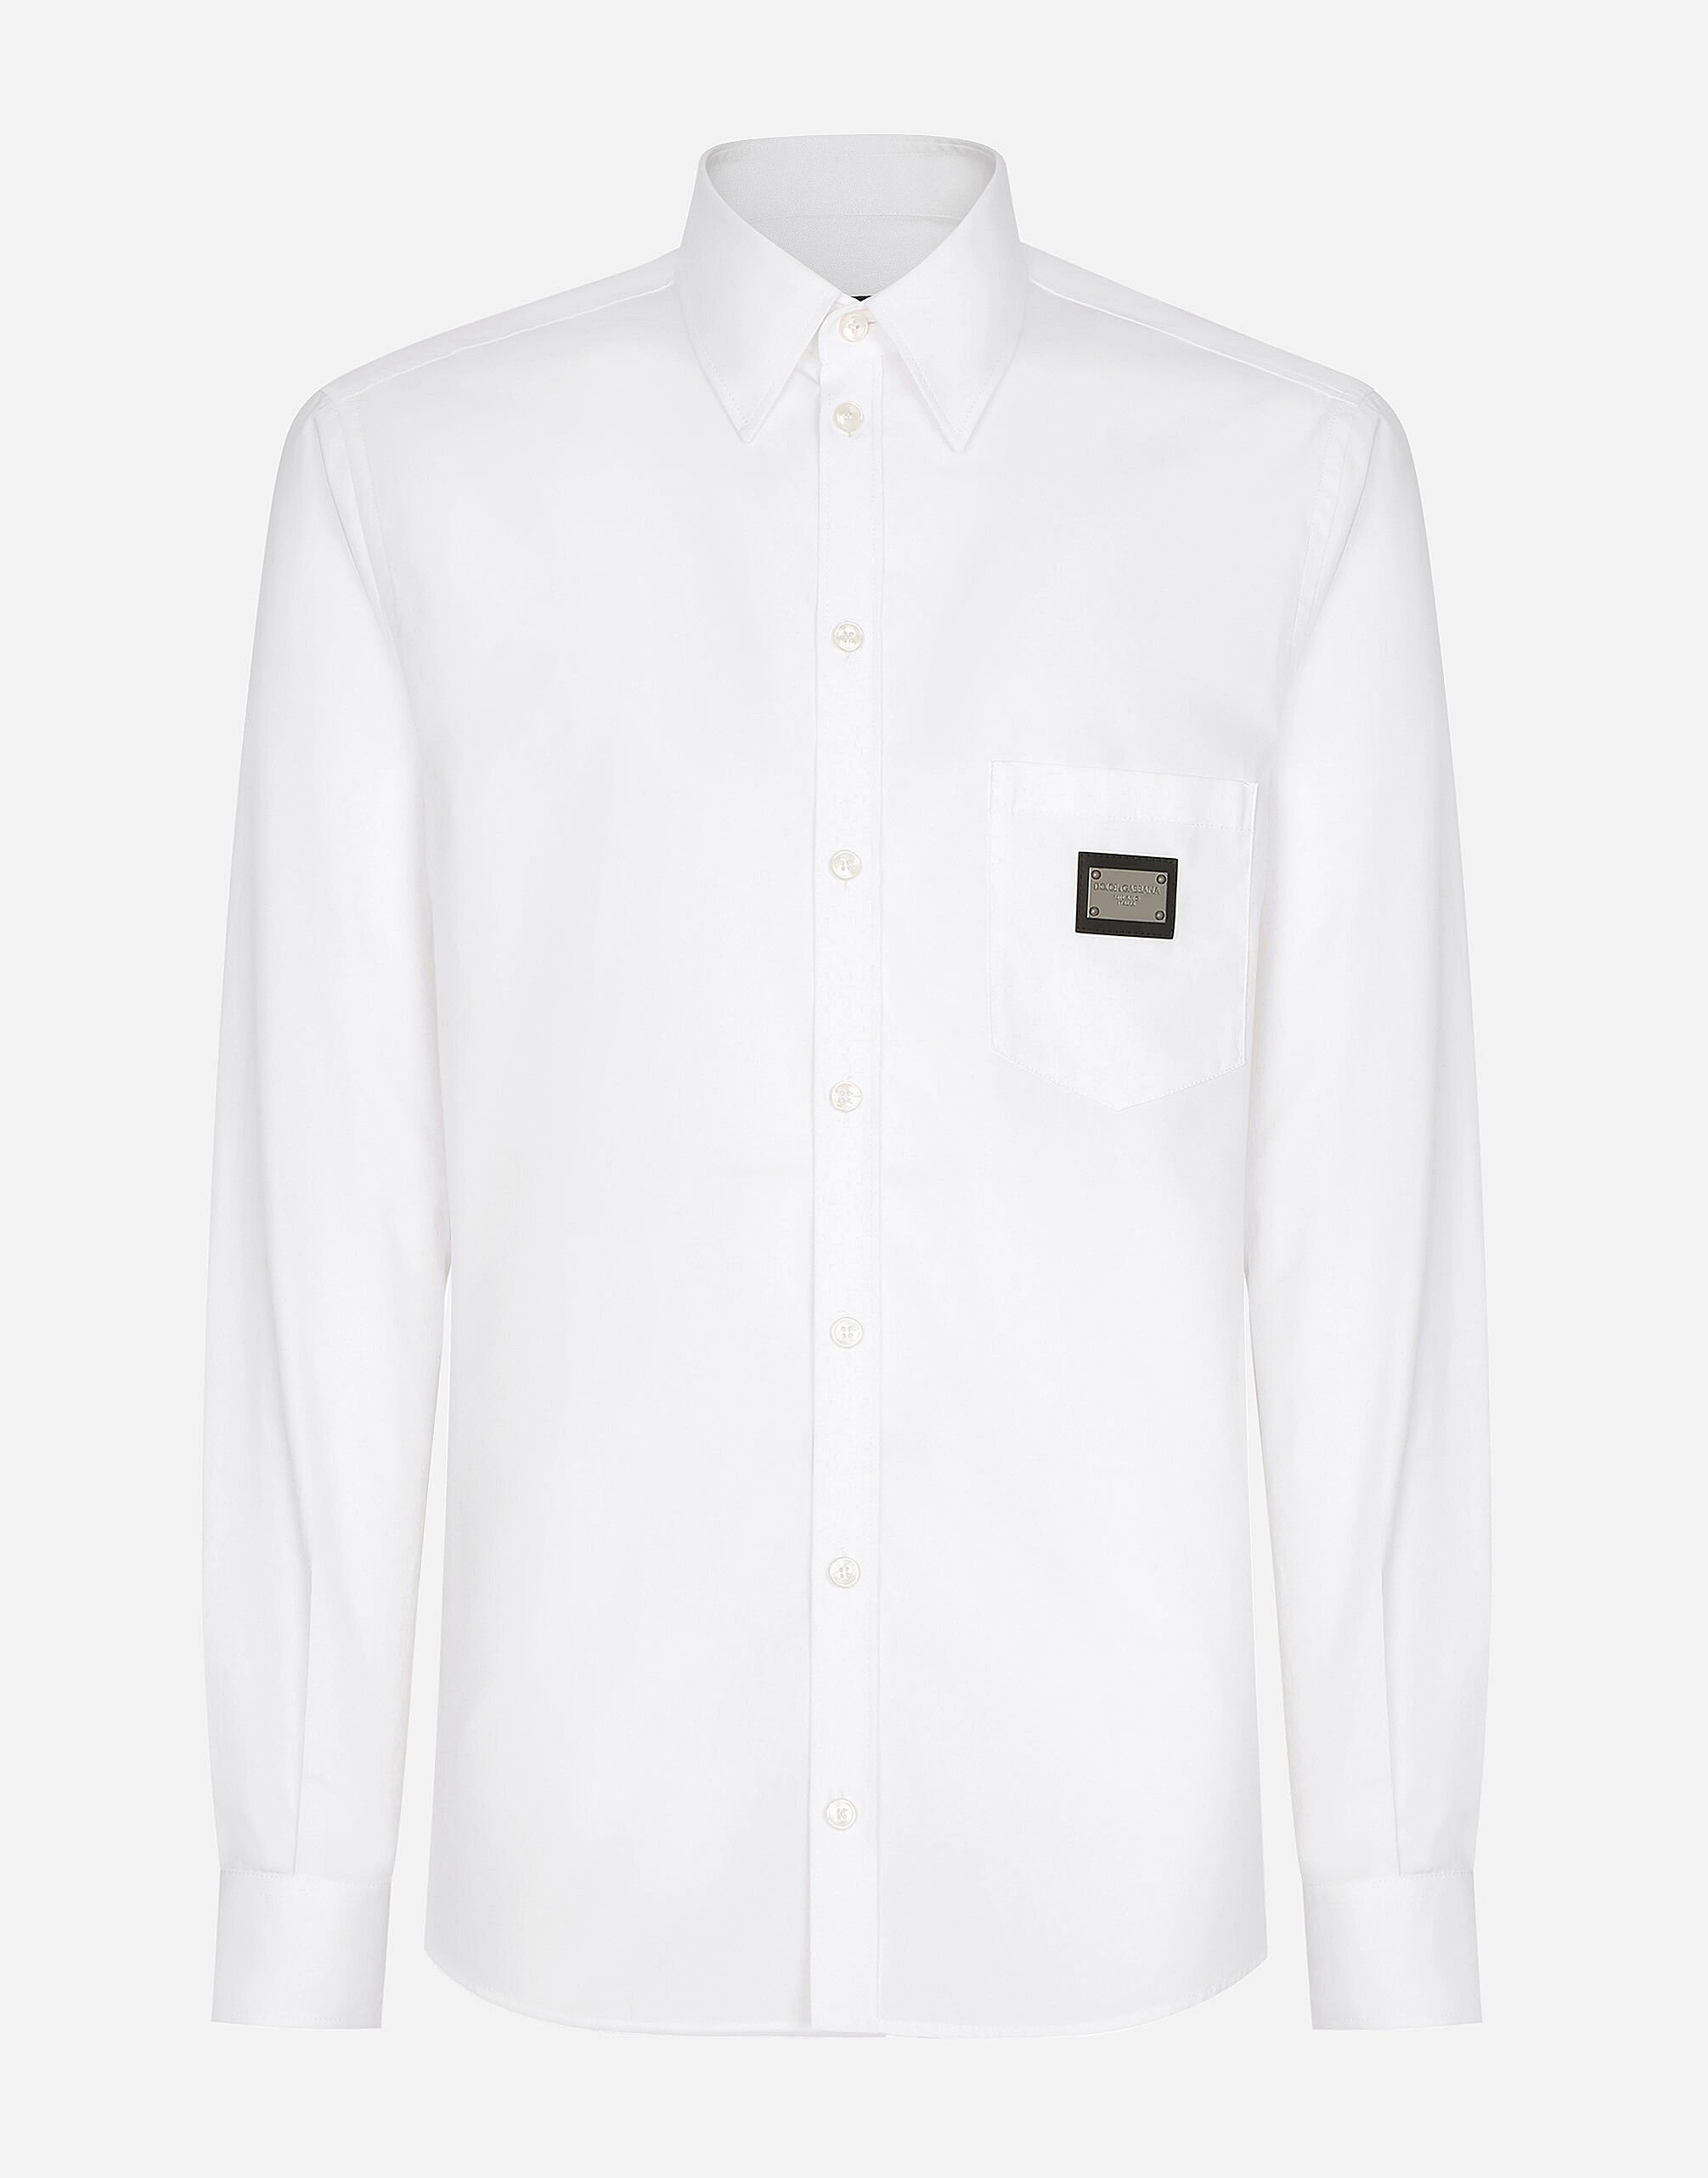 Dolce & Gabbana Cotton Martini-fit shirt with branded tag Black G8PL4TG7F2H